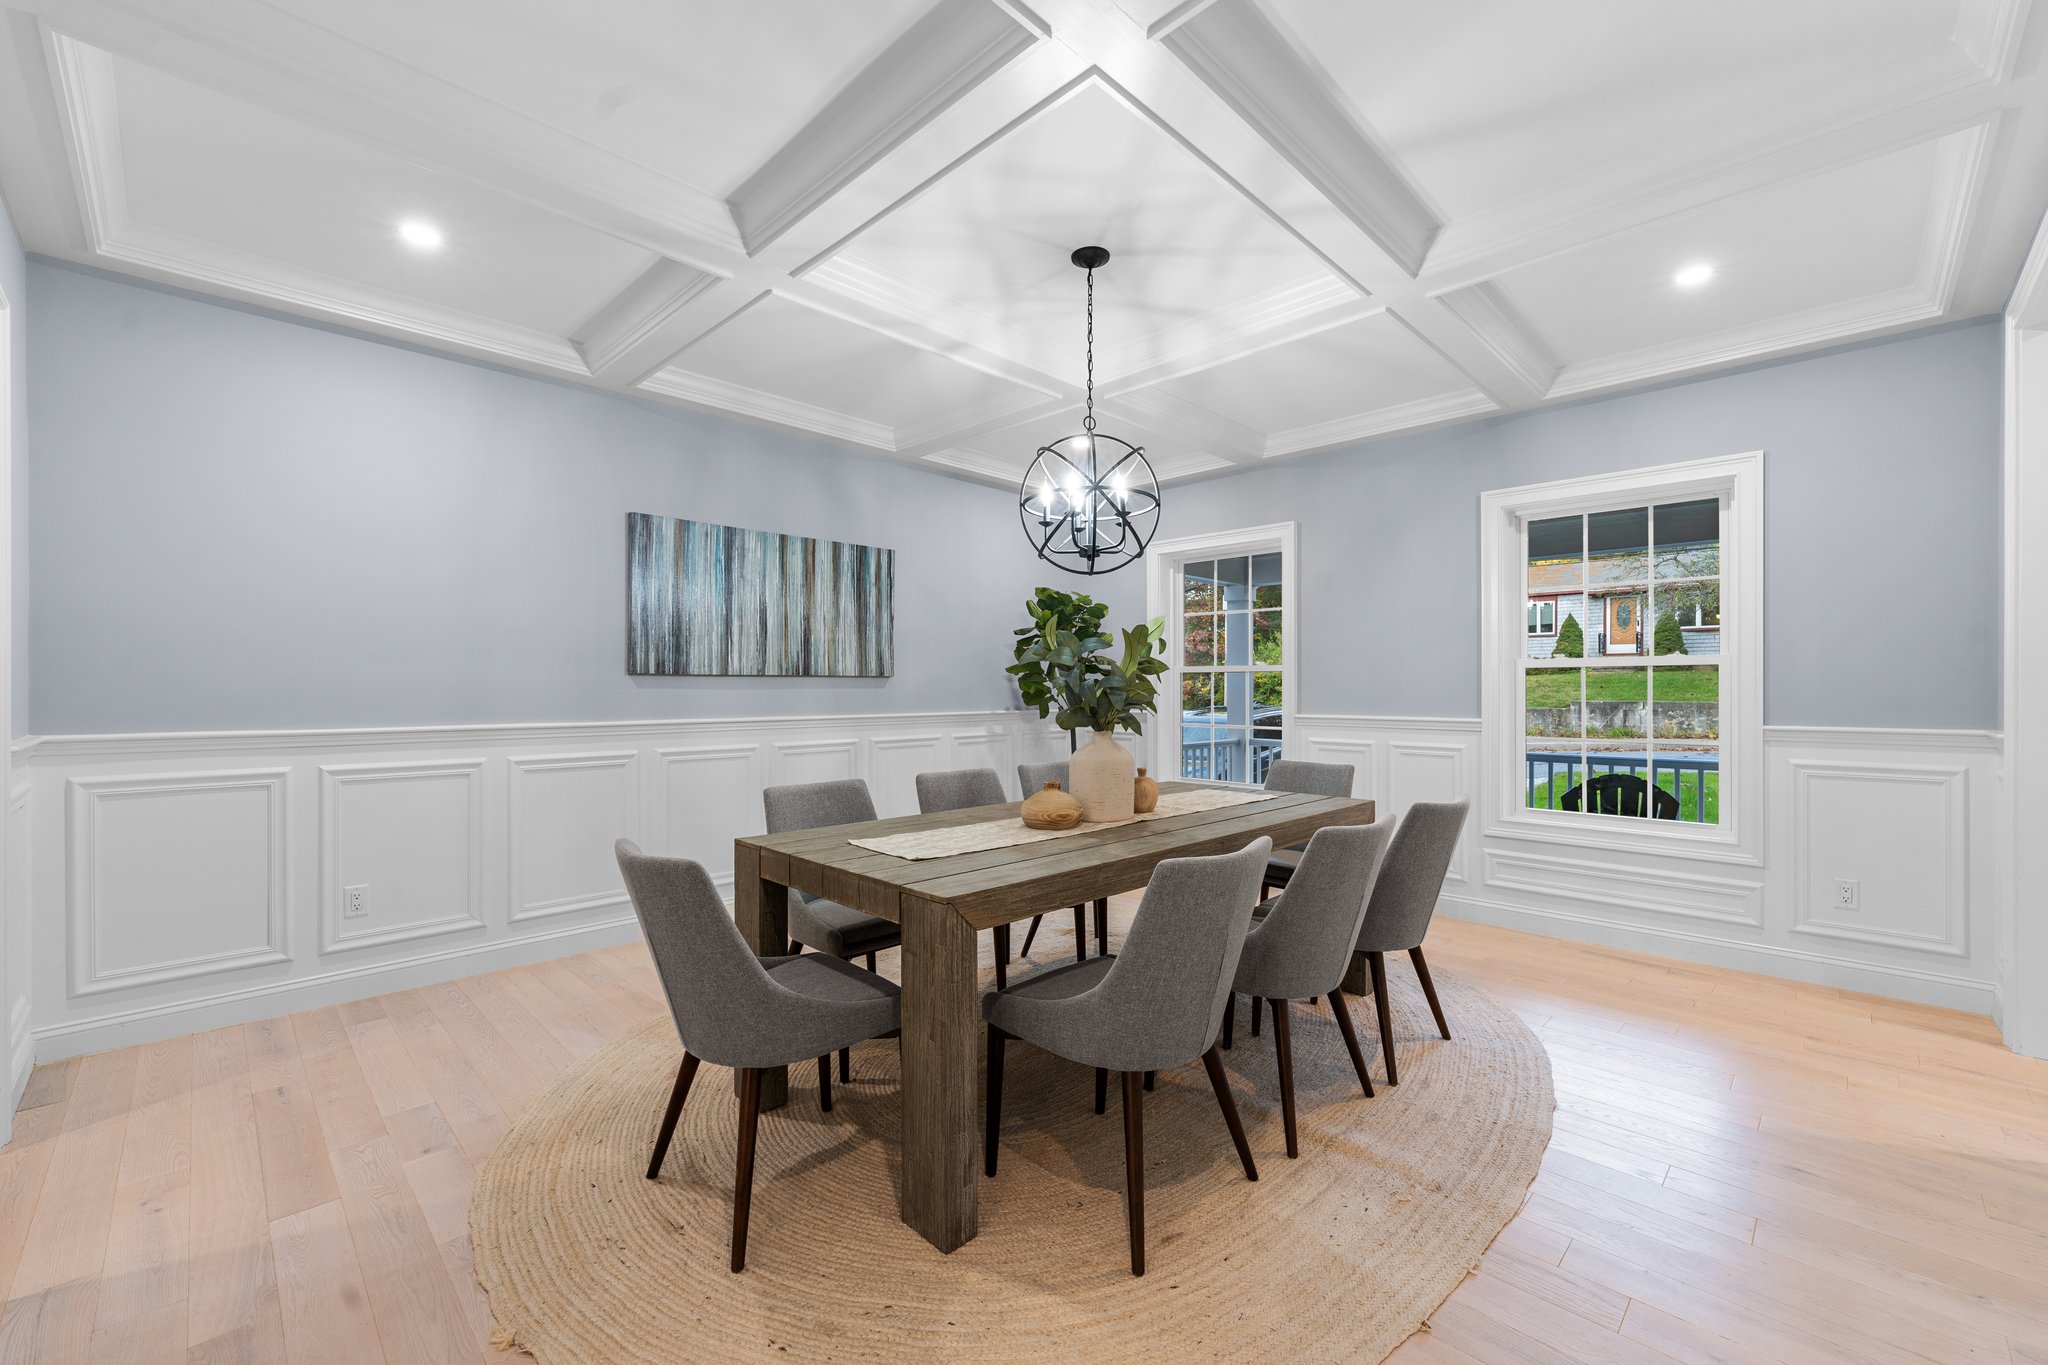 Formal Dining Room with Wainscoting, Coffered Ceiling, Recessed Lights & Decorative Chandelier